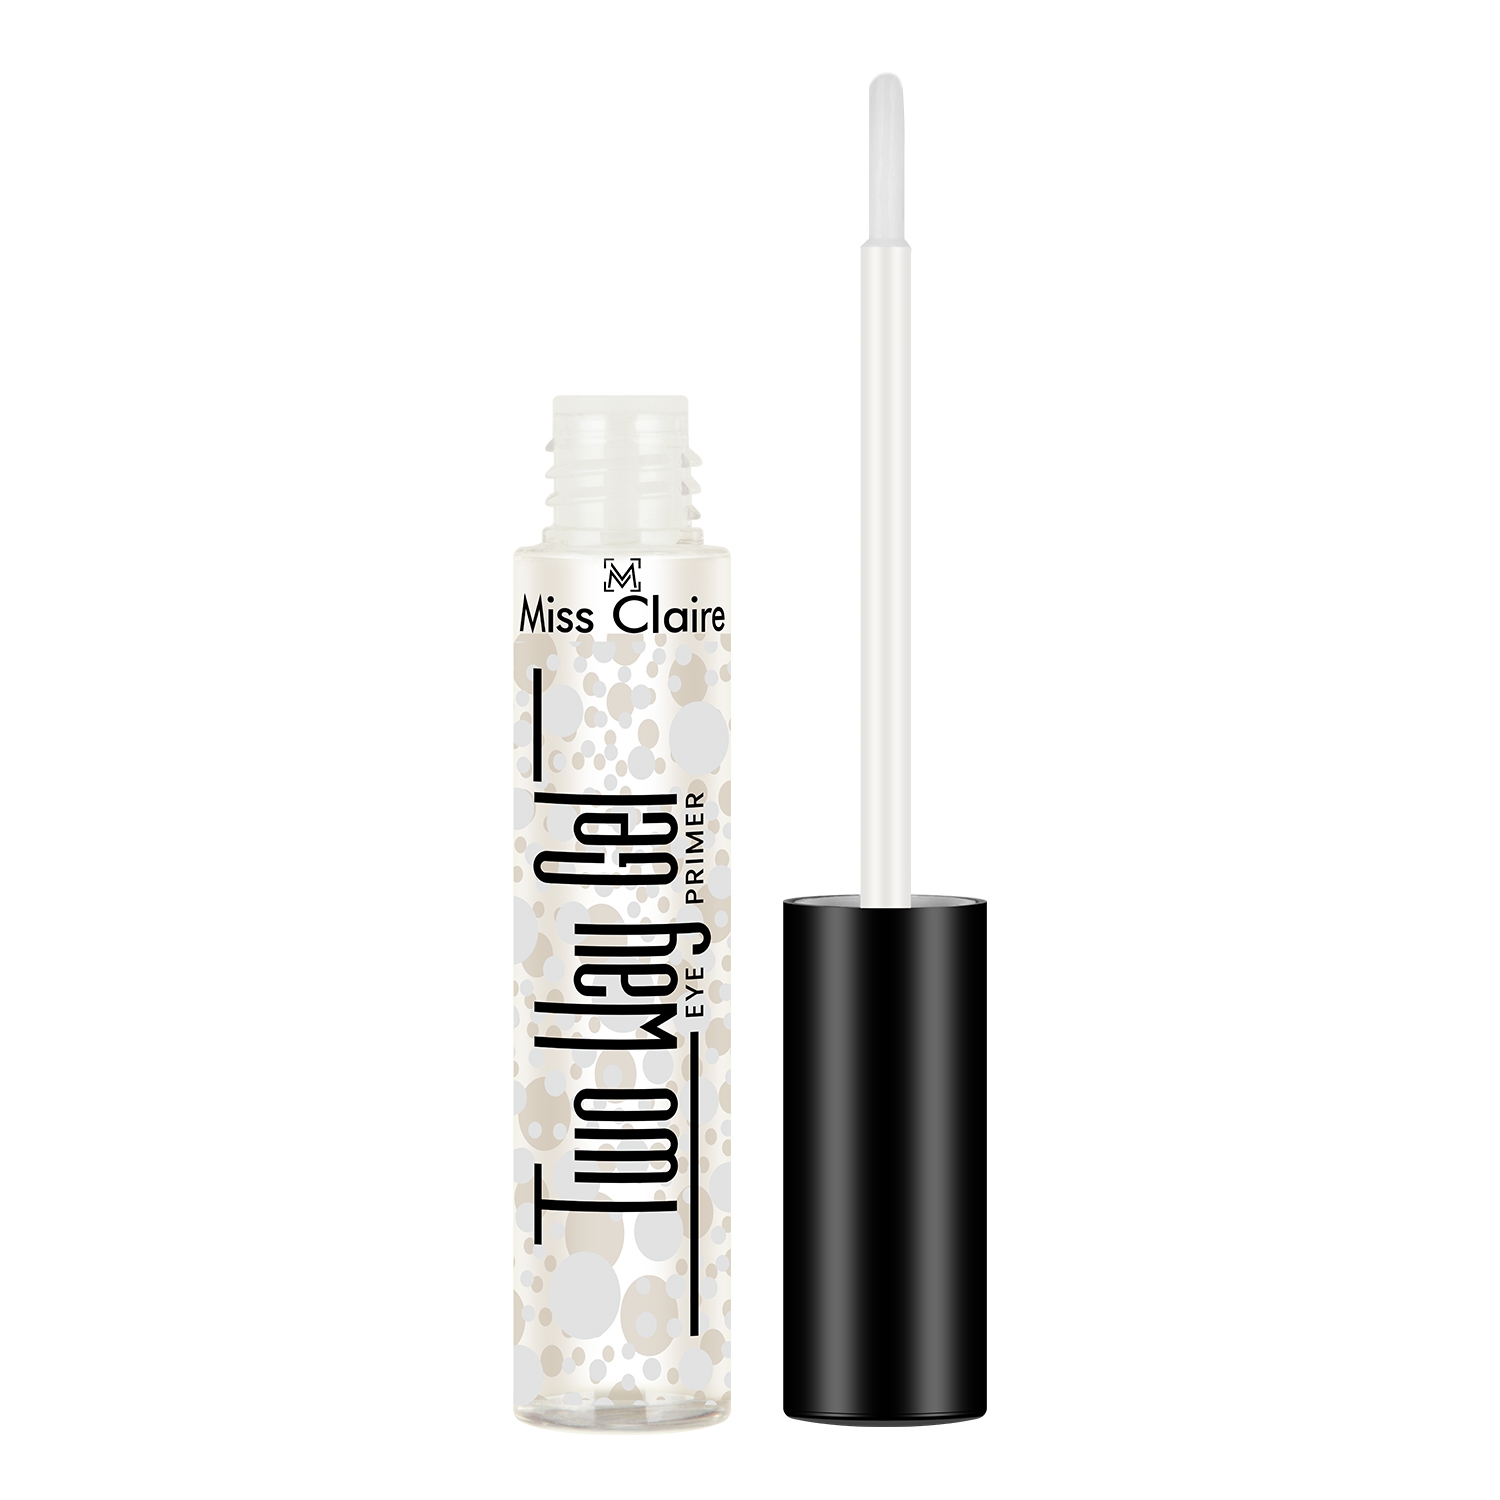 Miss Claire Two Way Gel Eye Primer - (8ml)